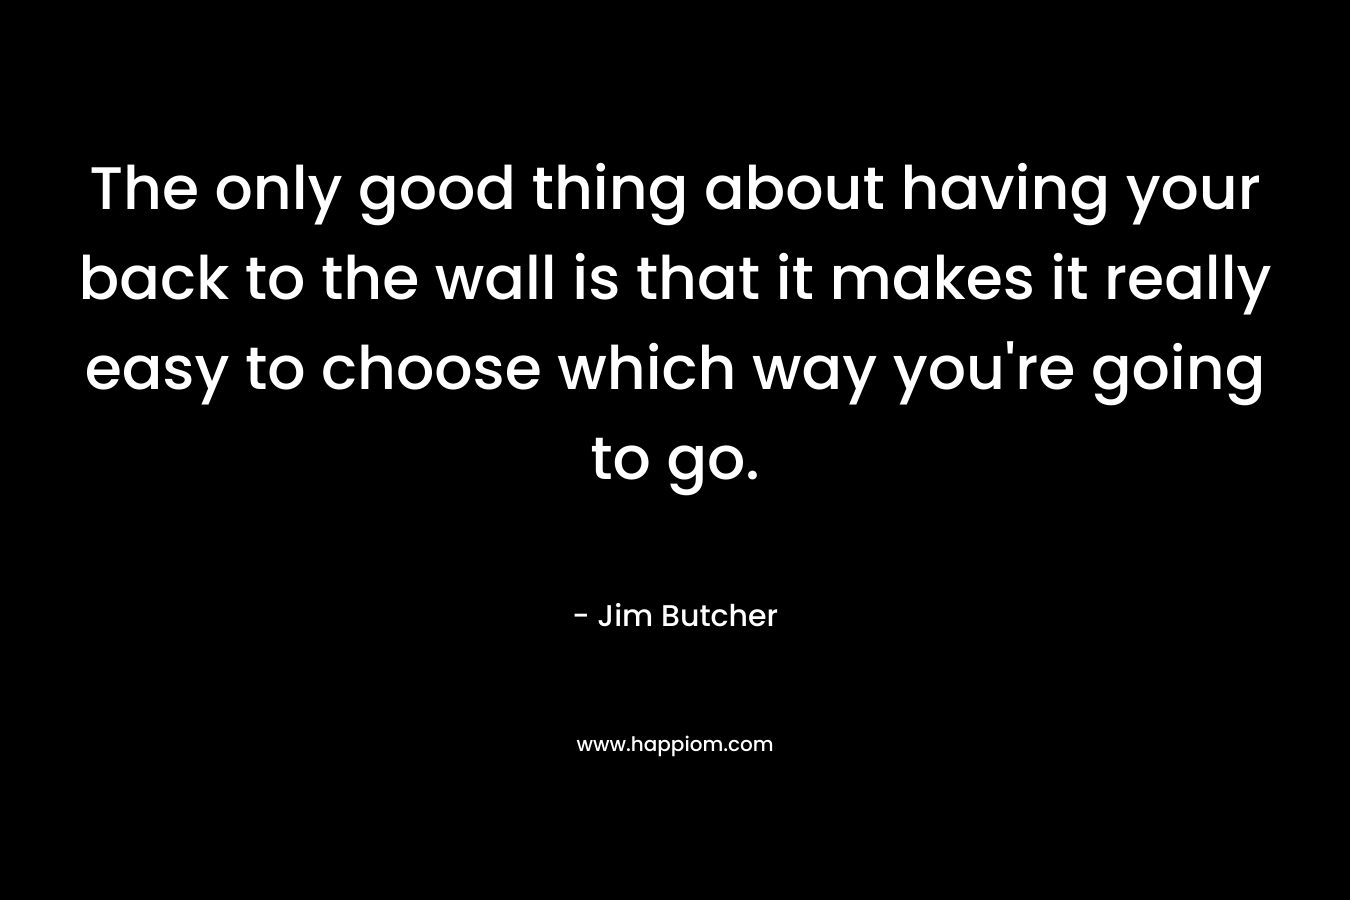 The only good thing about having your back to the wall is that it makes it really easy to choose which way you’re going to go. – Jim Butcher